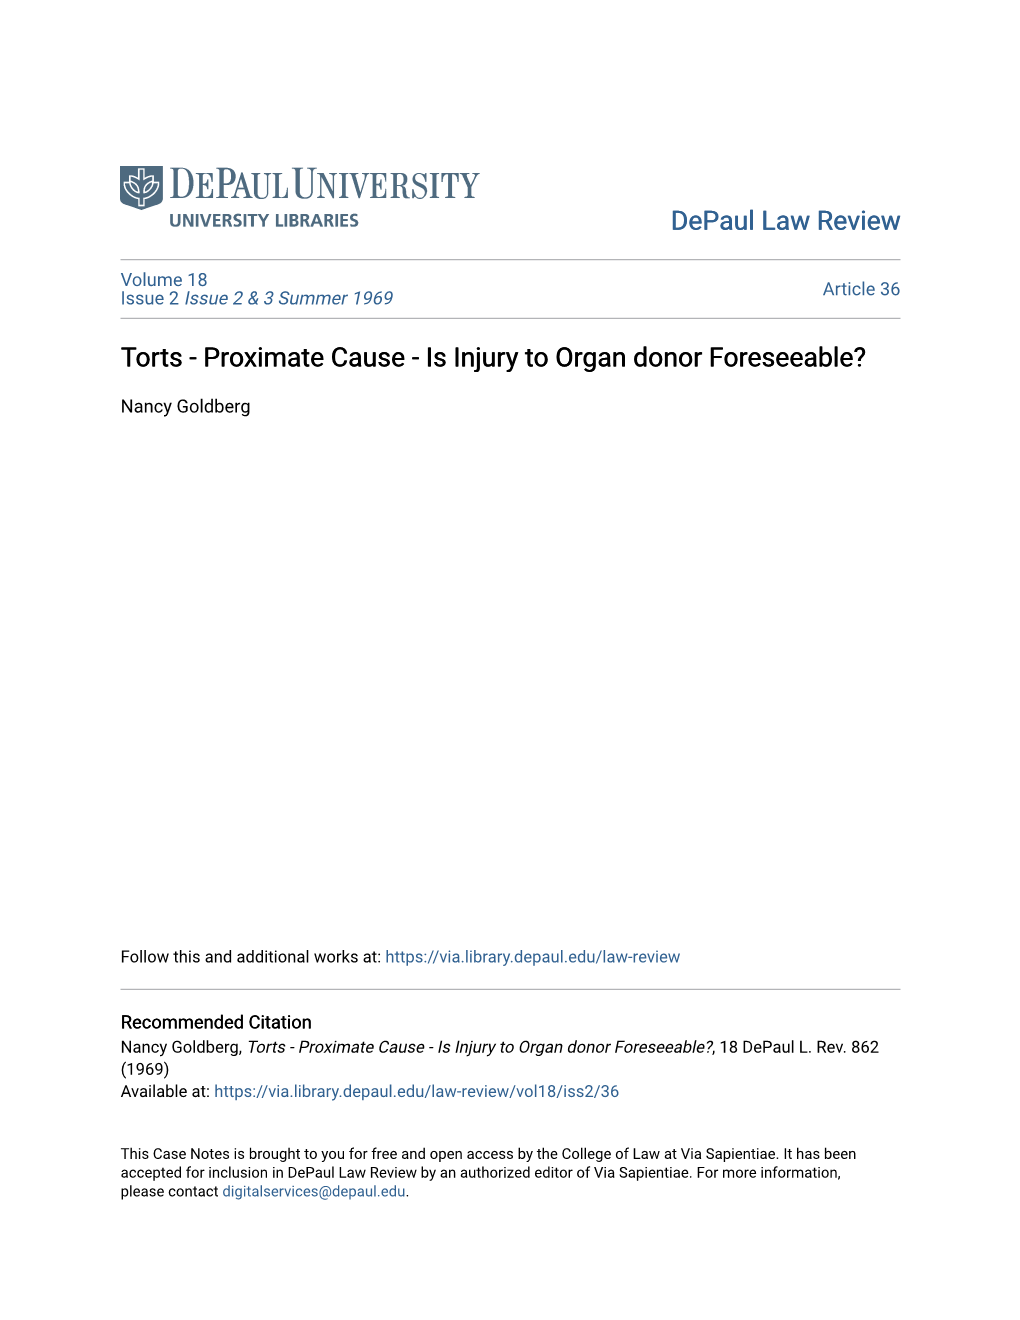 Torts - Proximate Cause - Is Injury to Organ Donor Foreseeable?